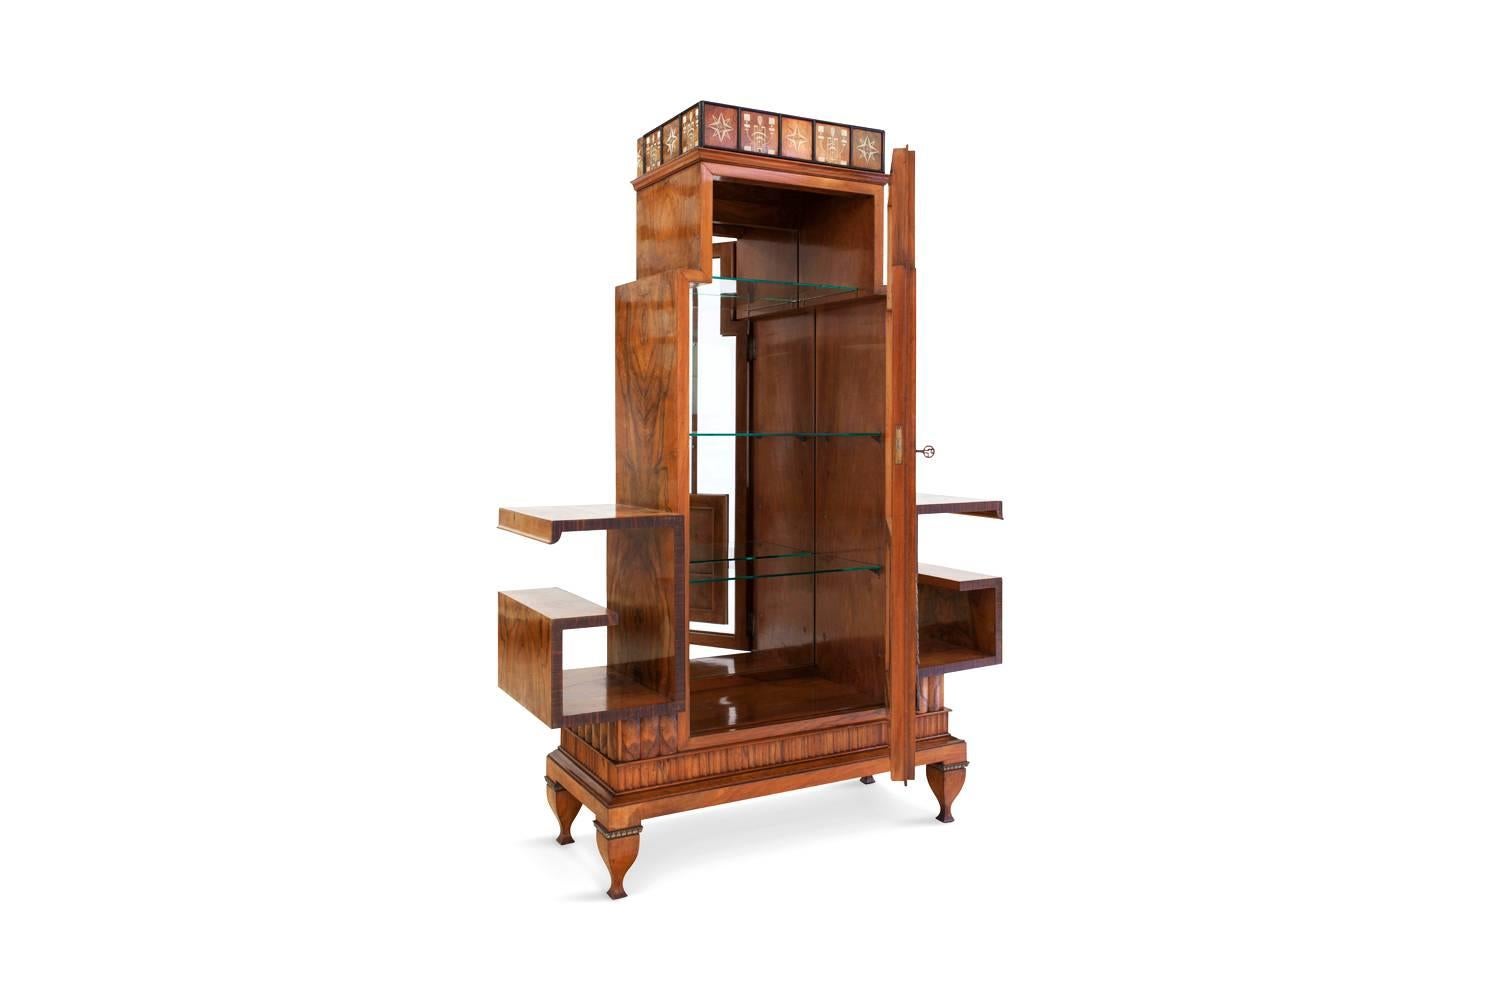 Art Deco Italian exuberance by Osvaldo Borsani.

Extremely decorative piece in walnut, Macassar, ebonized parts and birch inlay
an unusual and high-end Milanese piece from circa 1940.

Reminds of the works of Carlo Bugatti

The item shows a